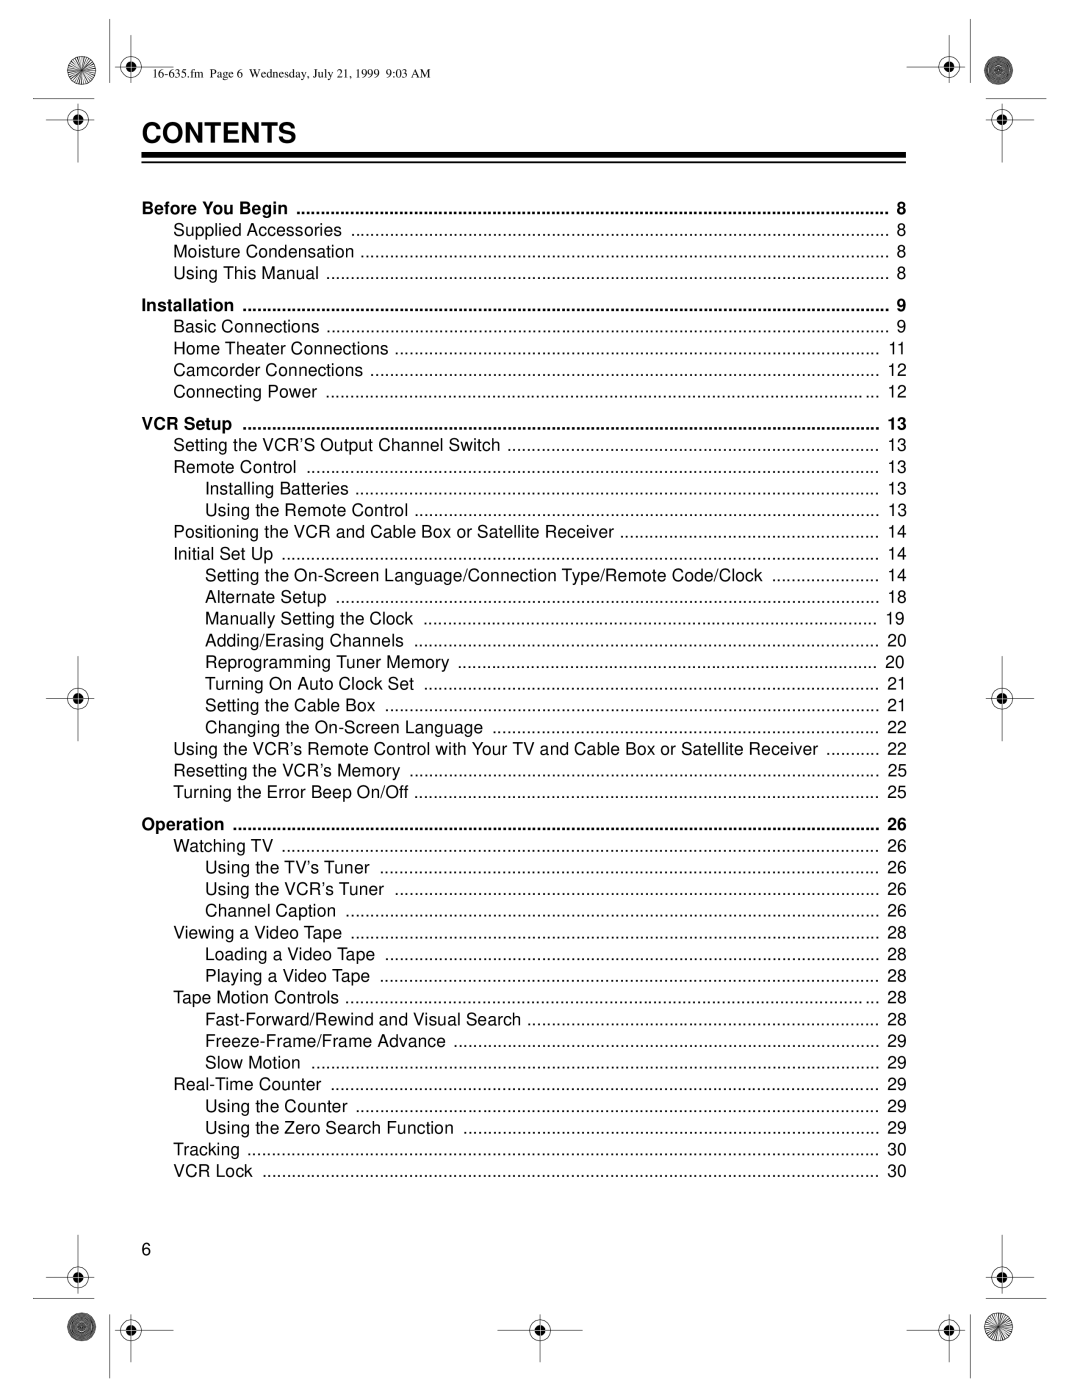 Radio Shack 66 owner manual Contents 